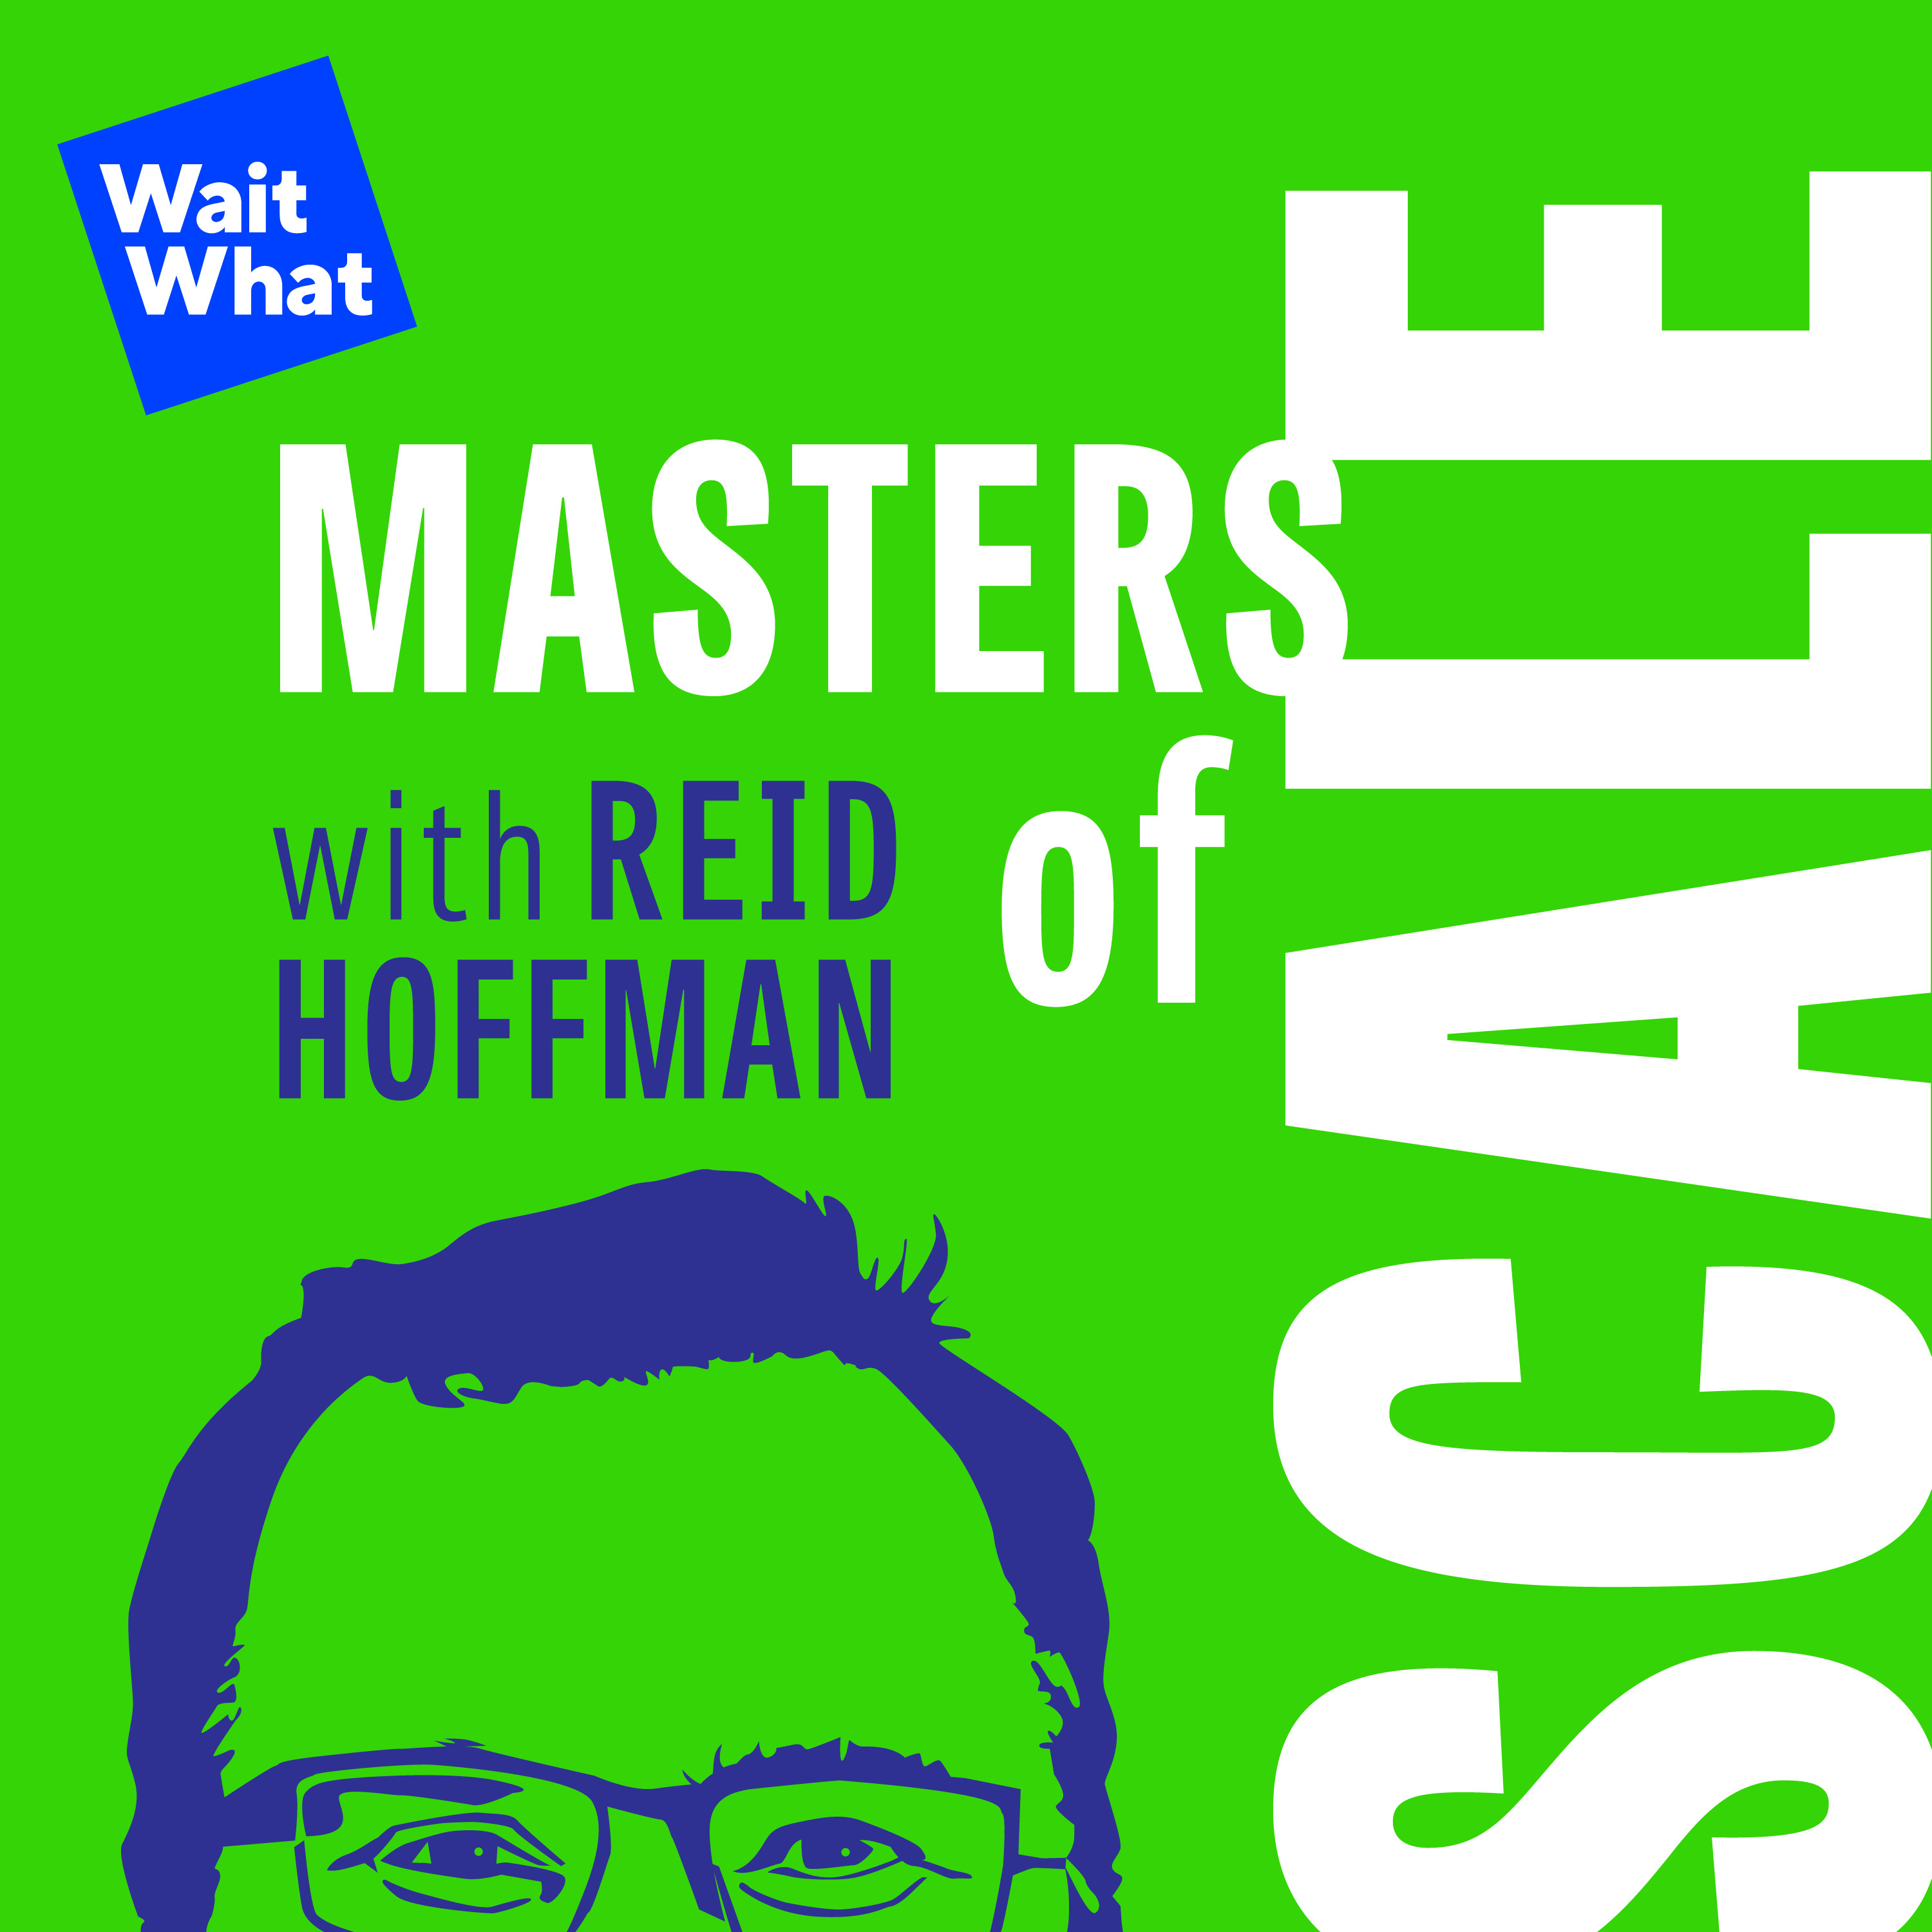 73. Wikipedia's Jimmy Wales: To scale, find the right values